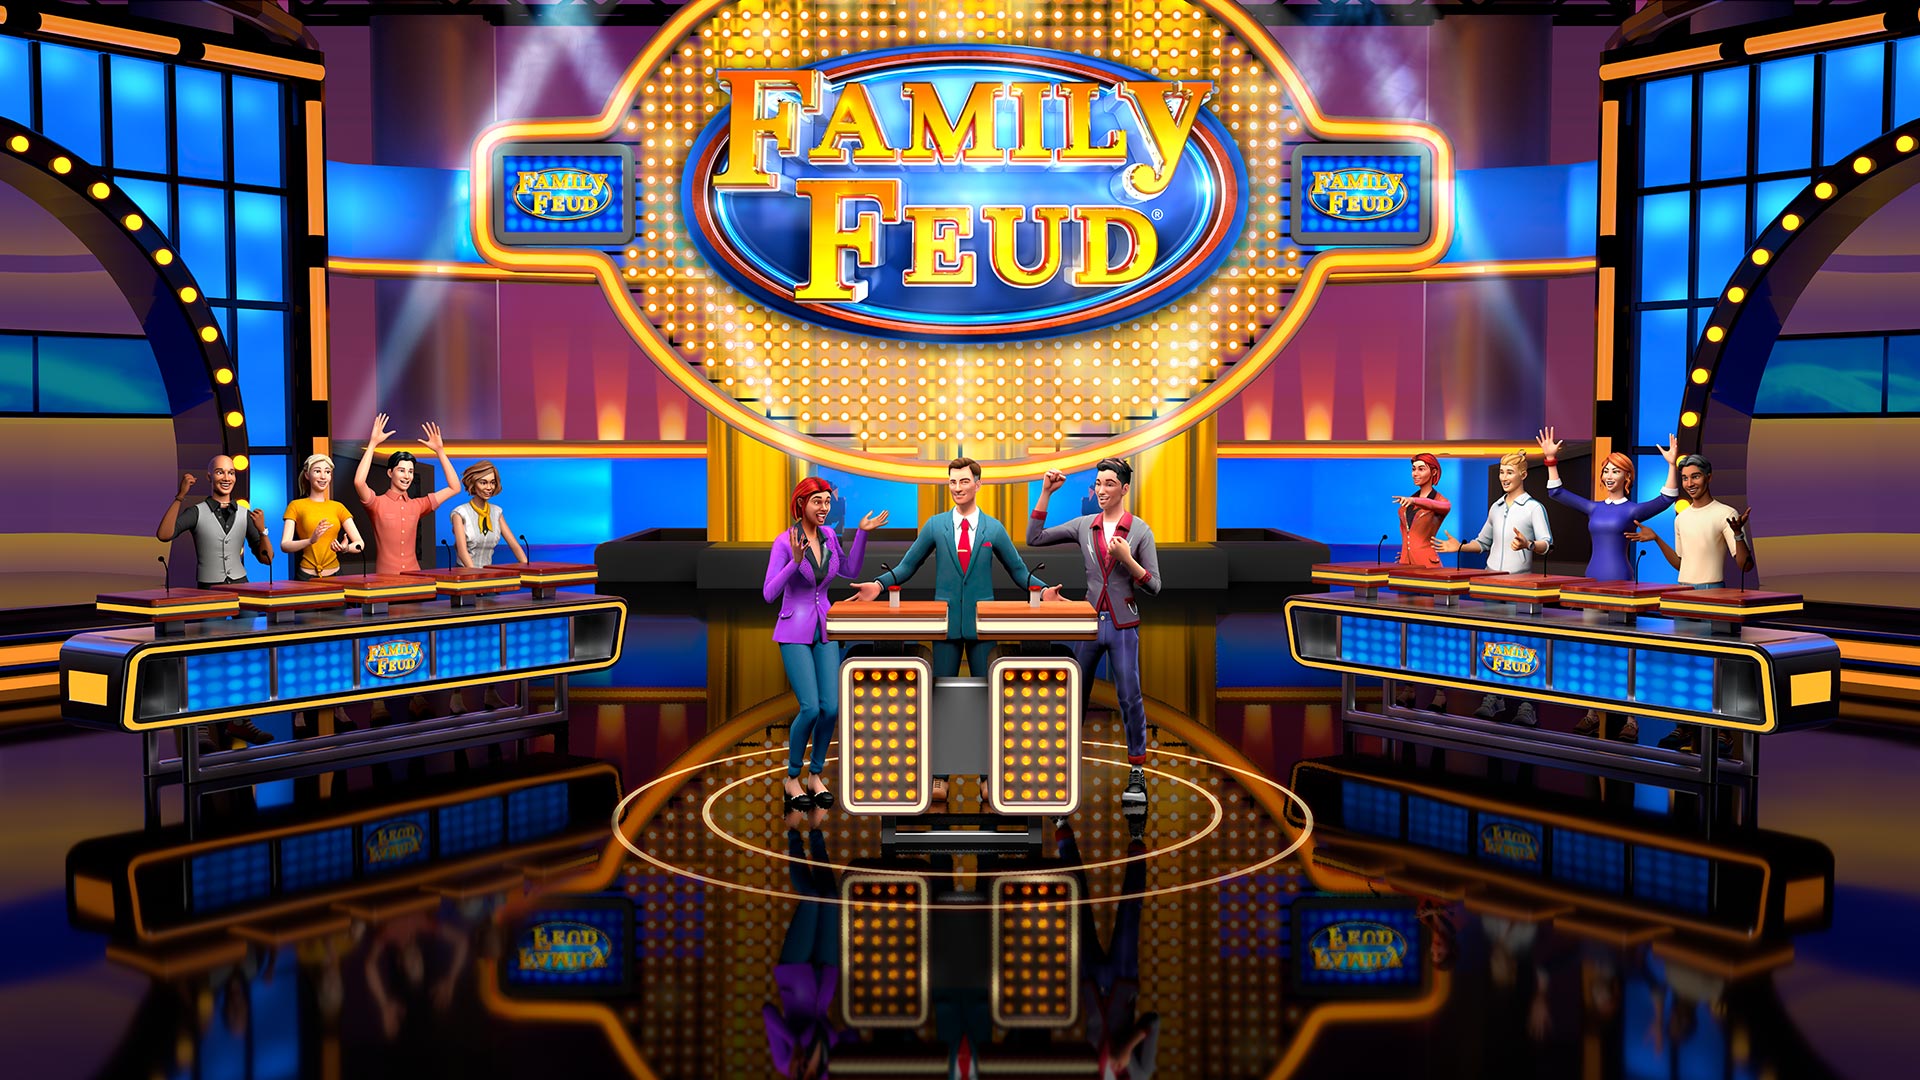 create-family-feud-game-computer-the-rules-of-the-family-feud-game